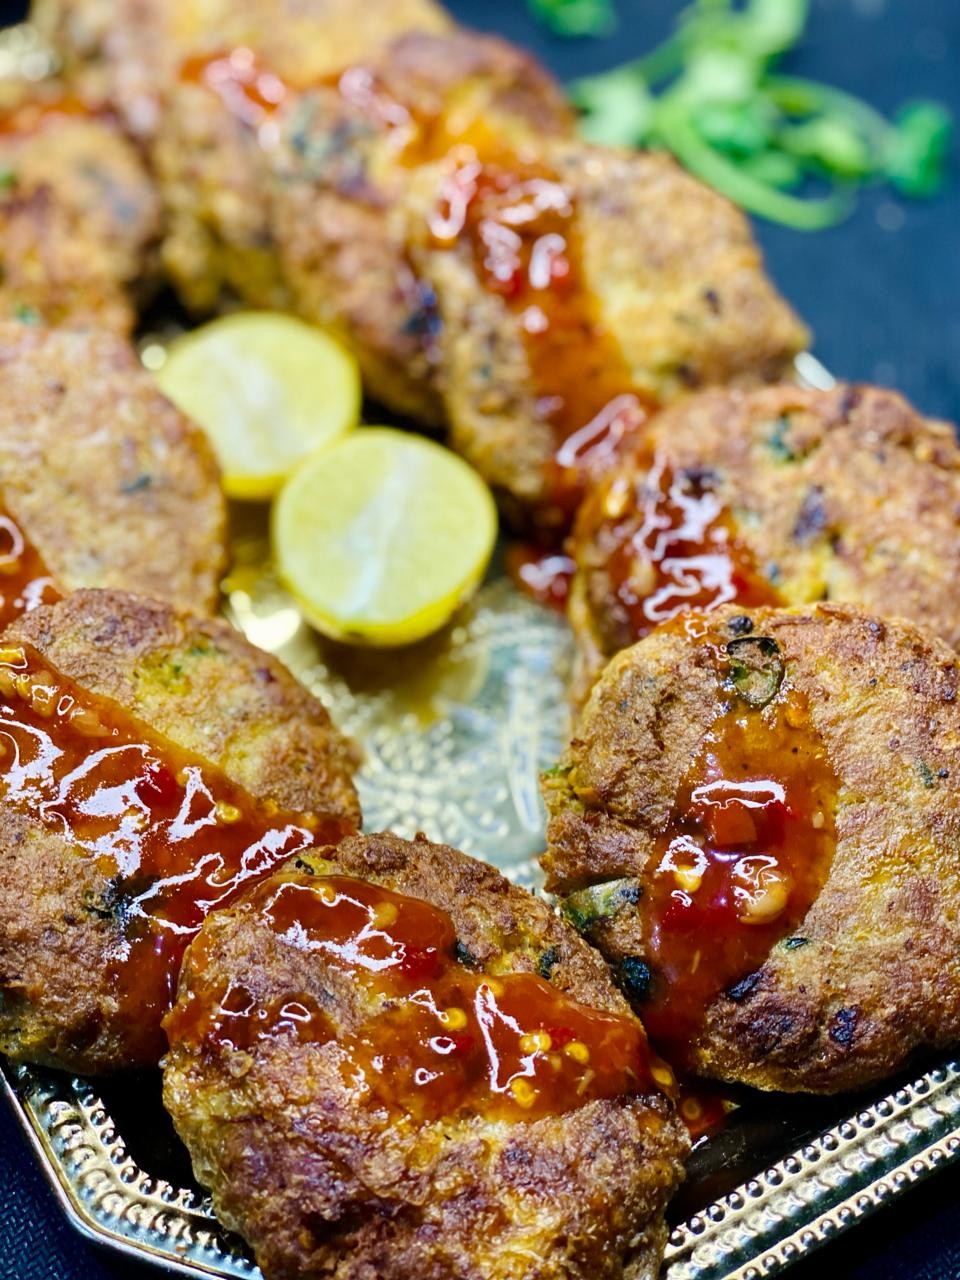 More About Shami kebabs?